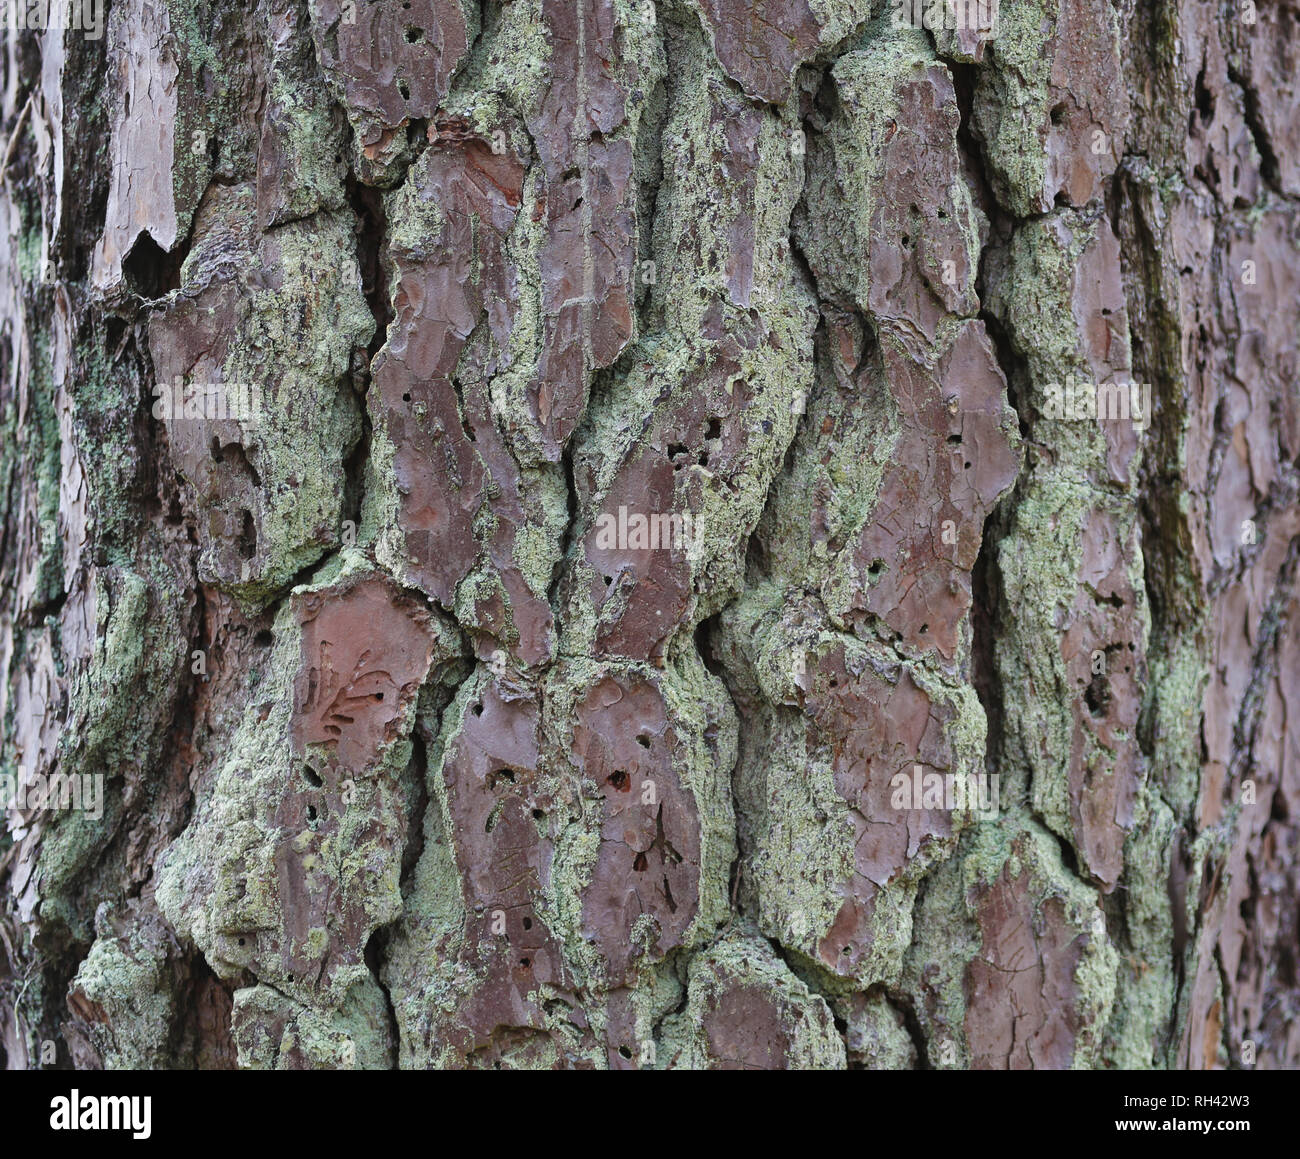 detail of pine bark texture and pattern Stock Photo